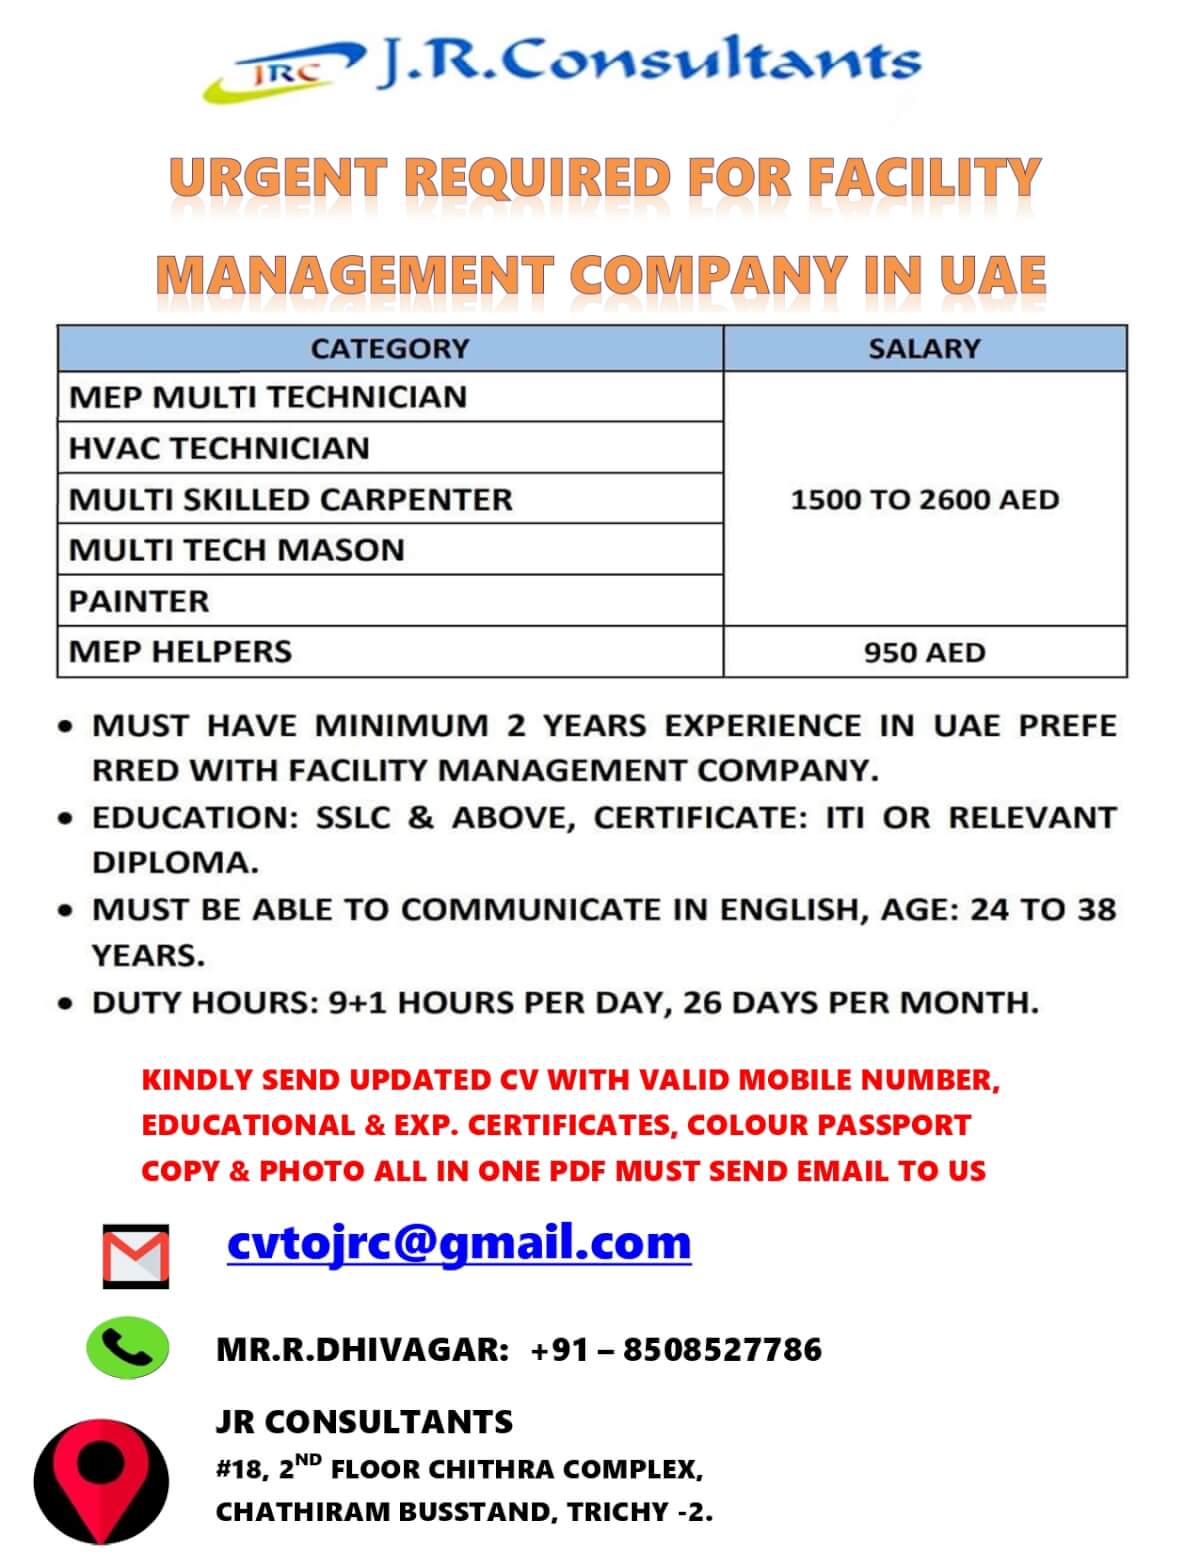 REQUIREMENT FOR UAE